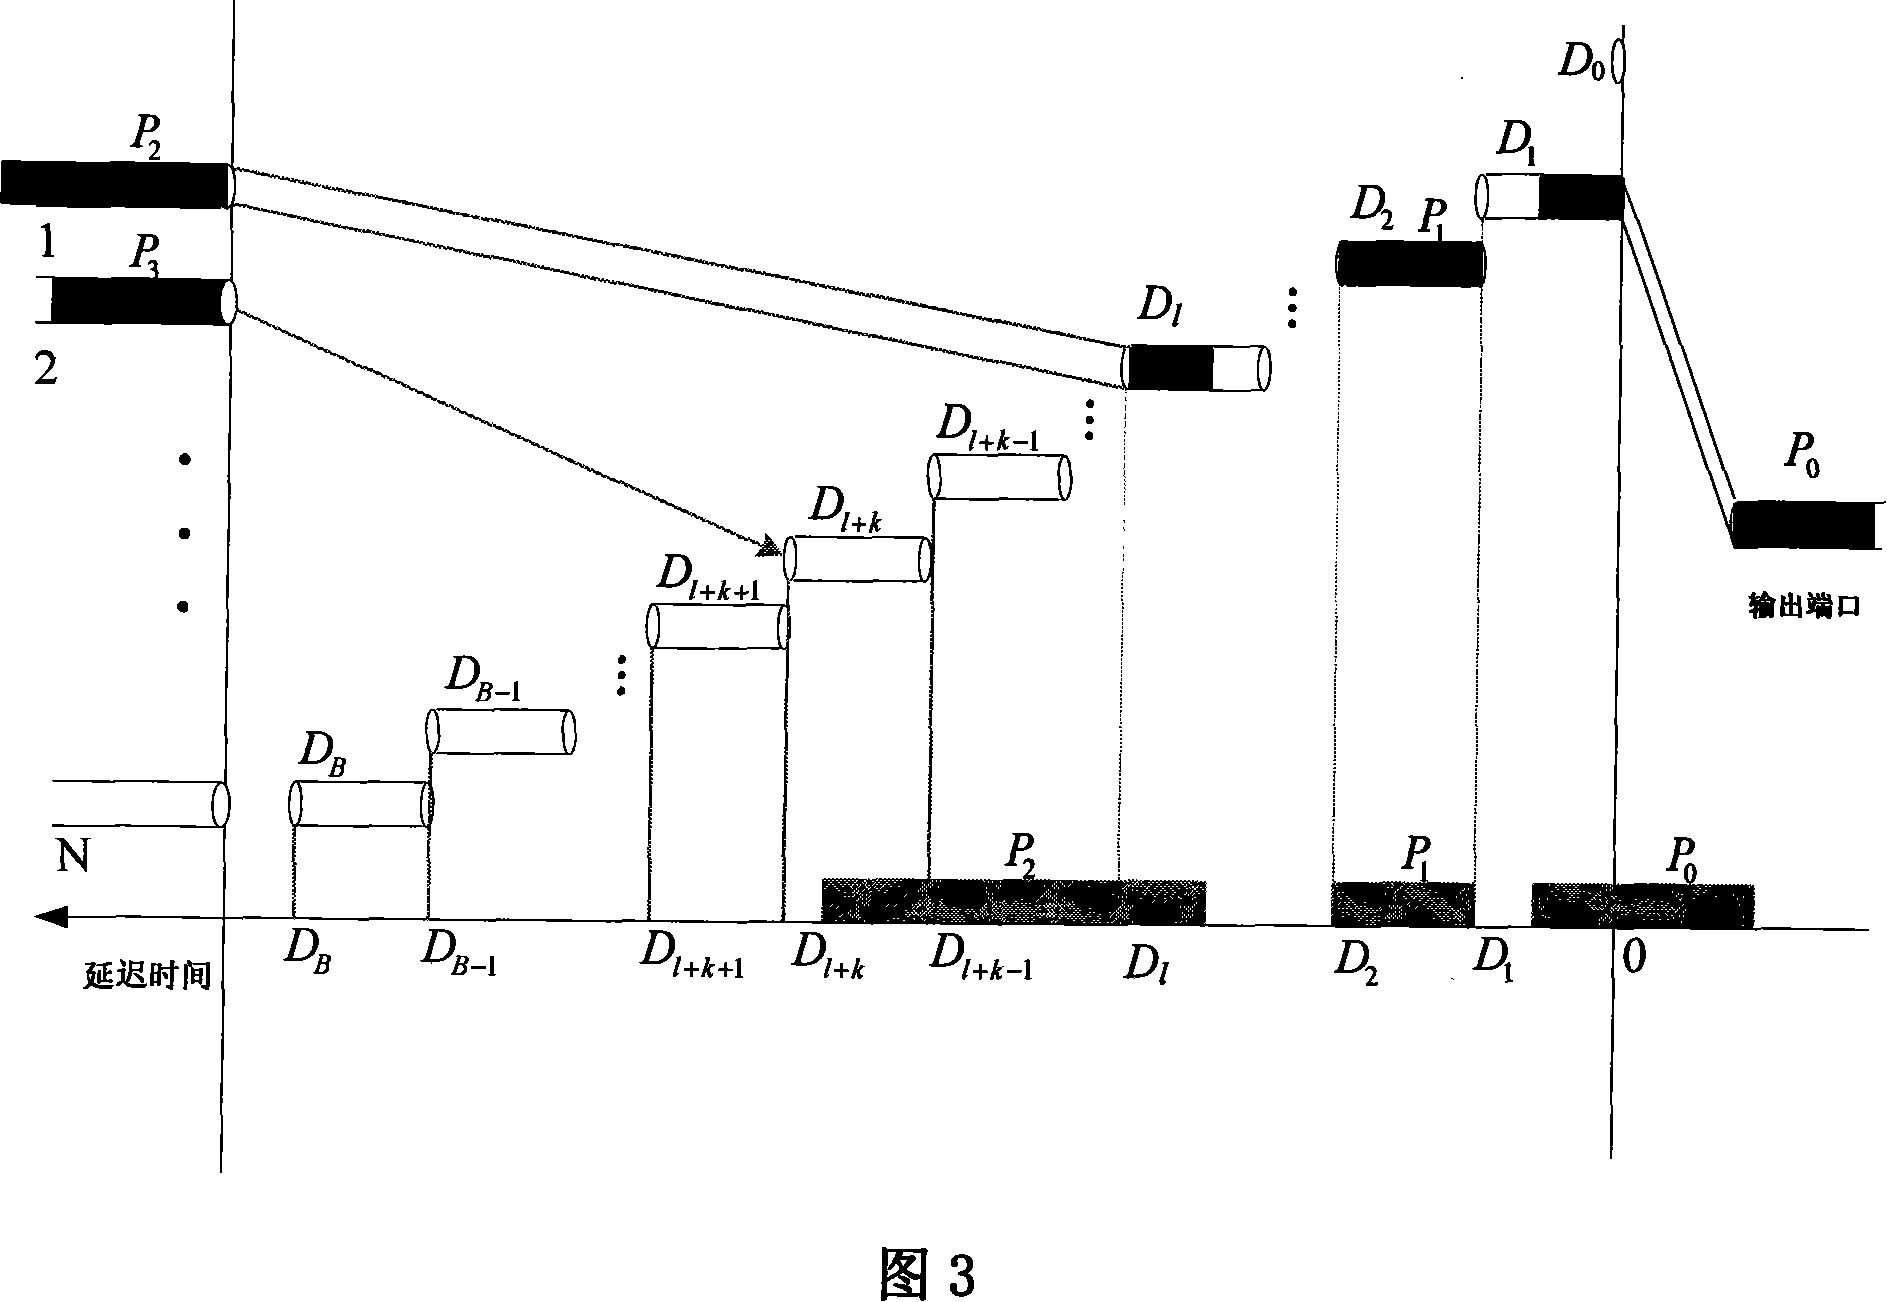 A buffering structure for sectioned share optical loop switching network